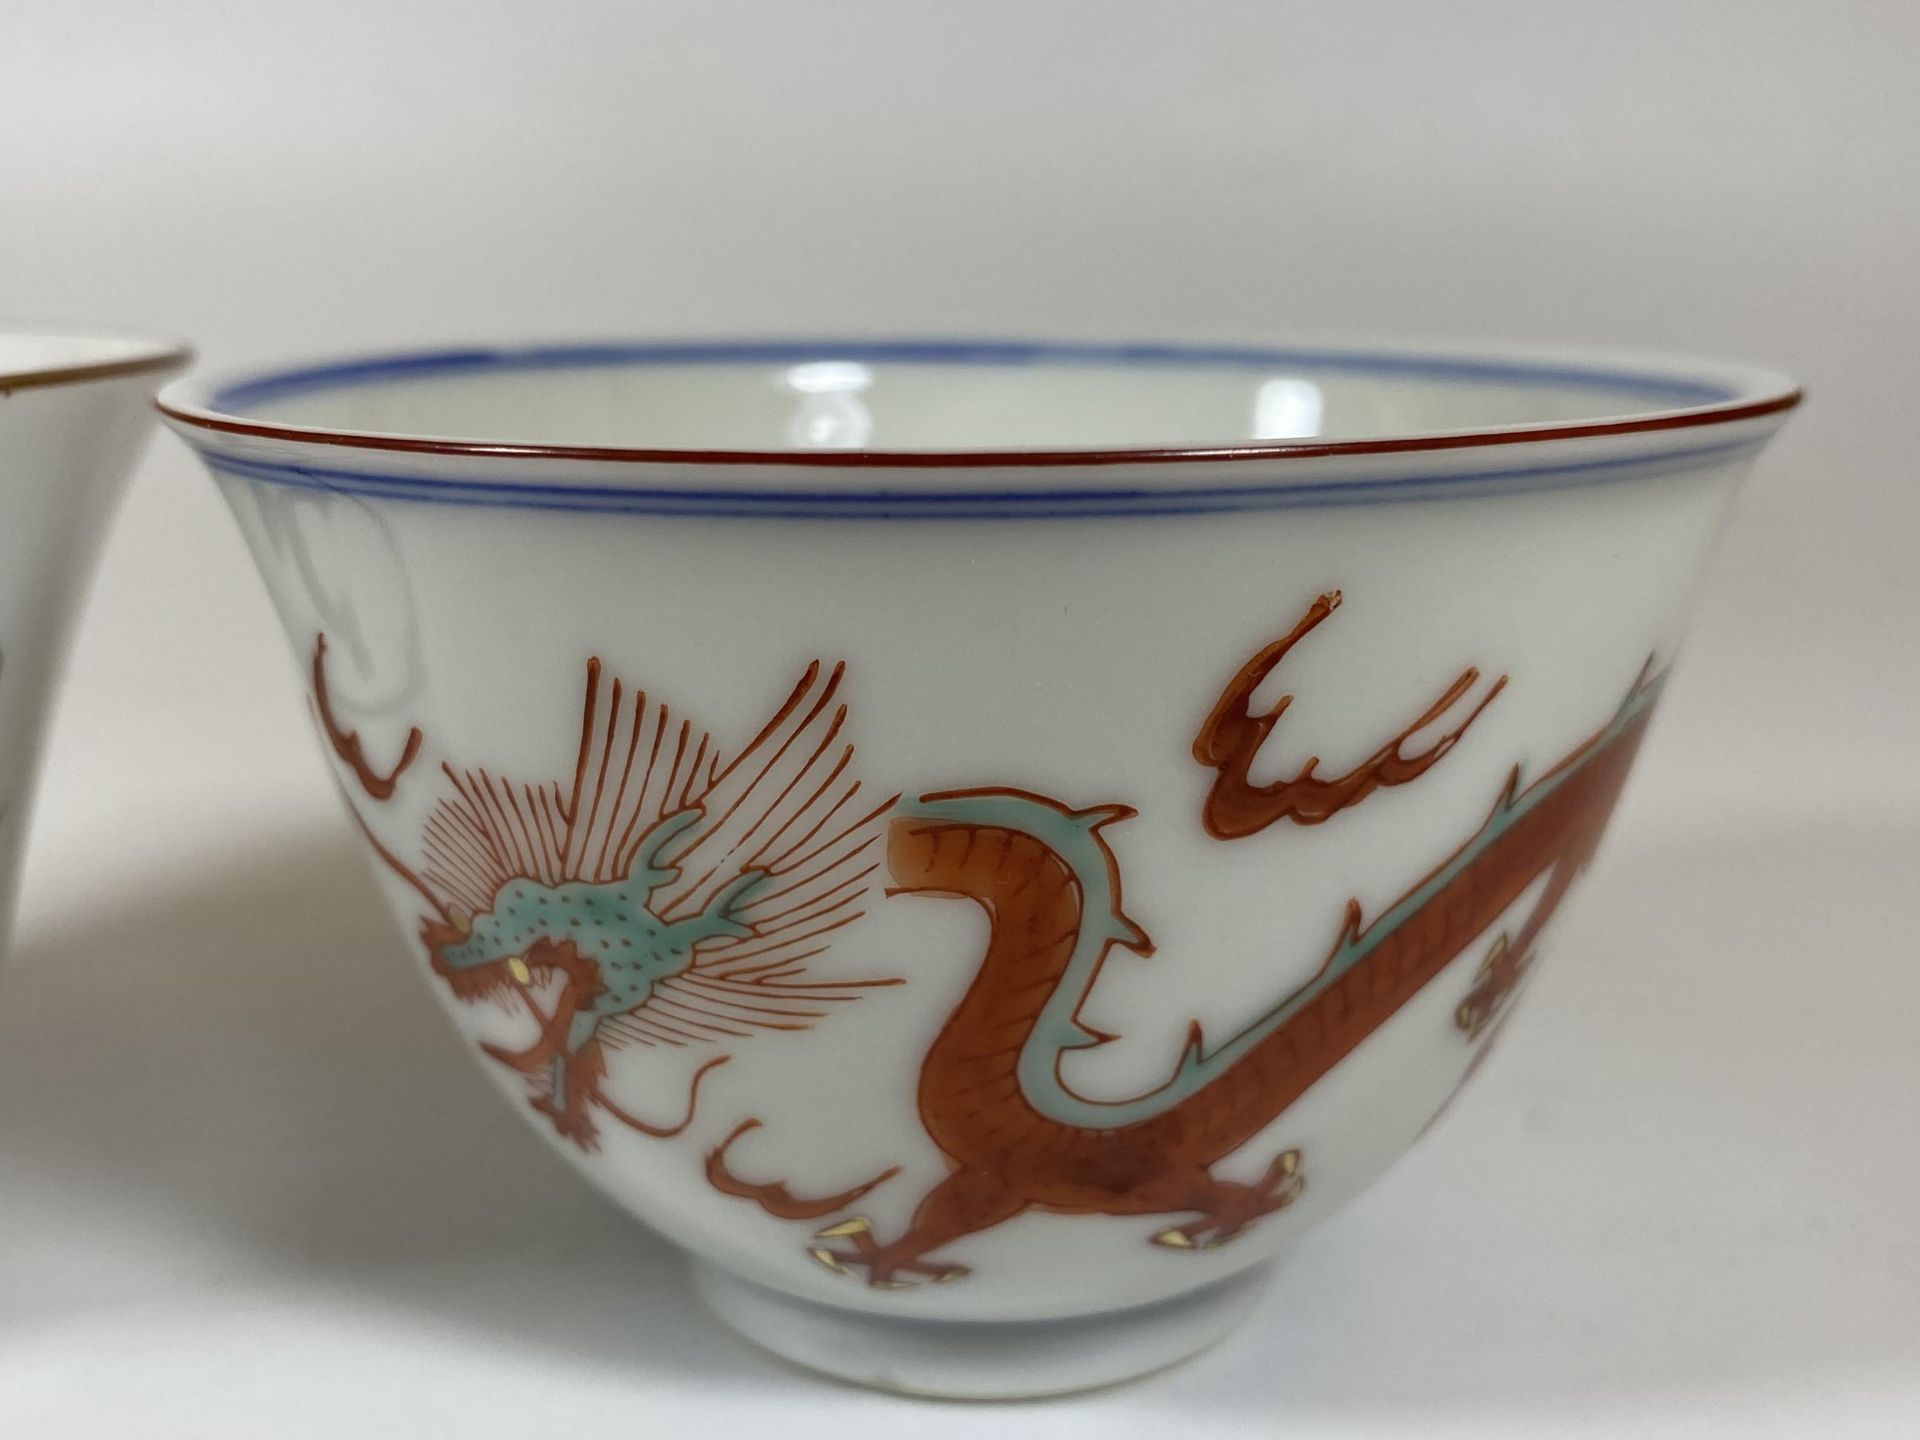 TWO MODERN CHINESE TEA BOWLS, ONE WITH DRAGON DESIGN, MARKED TO BASE, LARGEST DIAMETER 10CM - Image 2 of 5